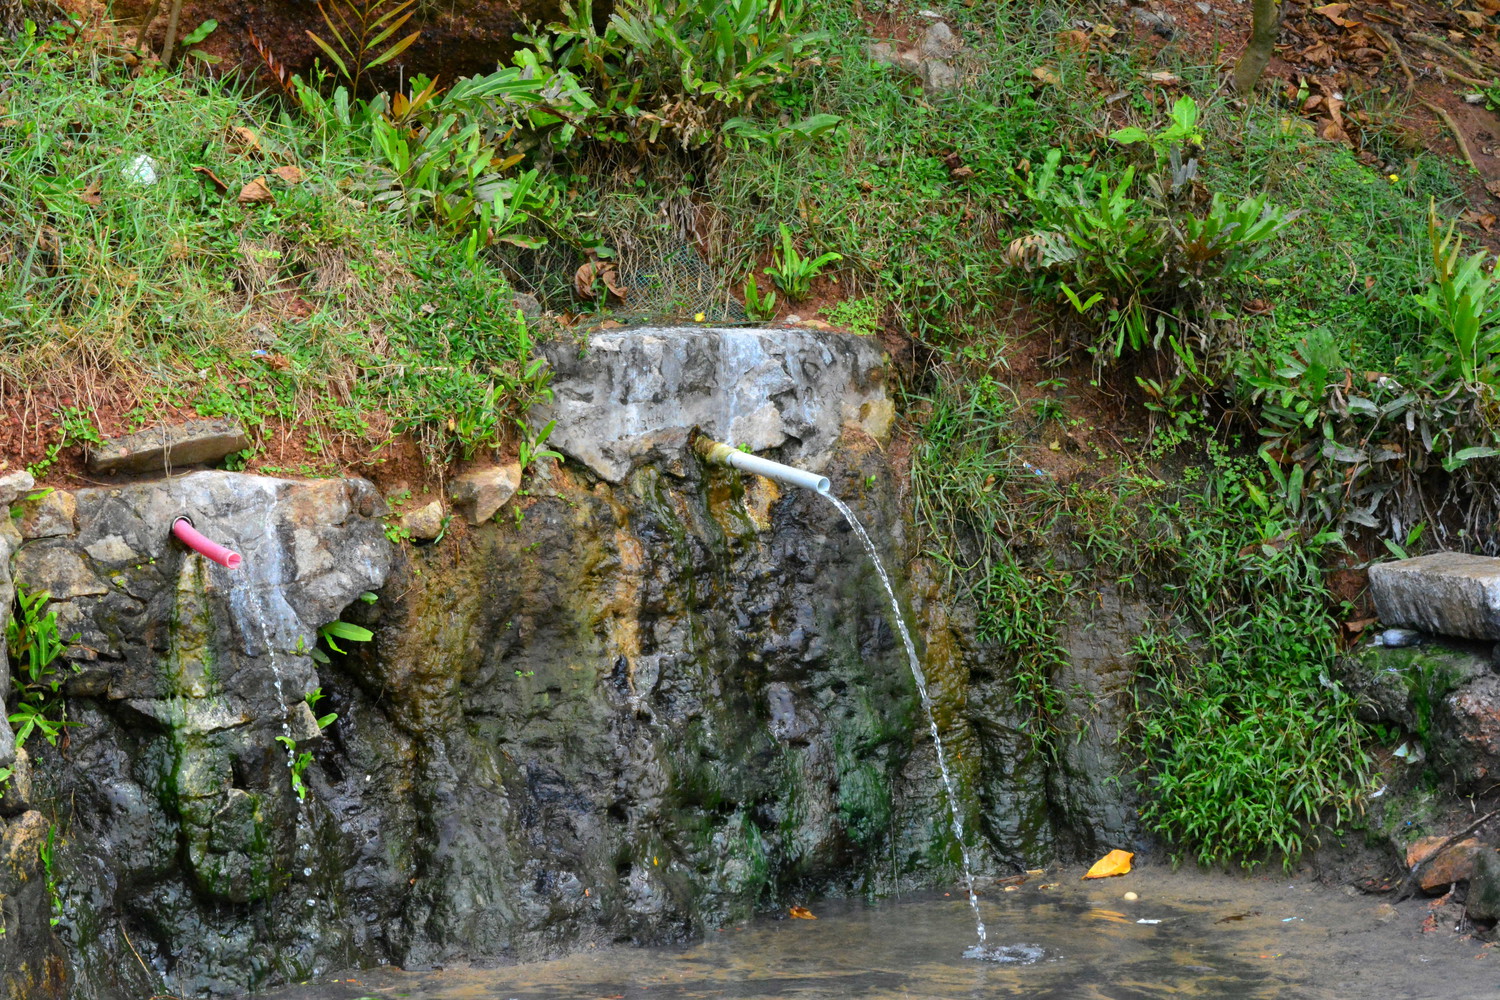 Natural spring water flowing out of pipes drilled into the rocks at the foot of a cliff